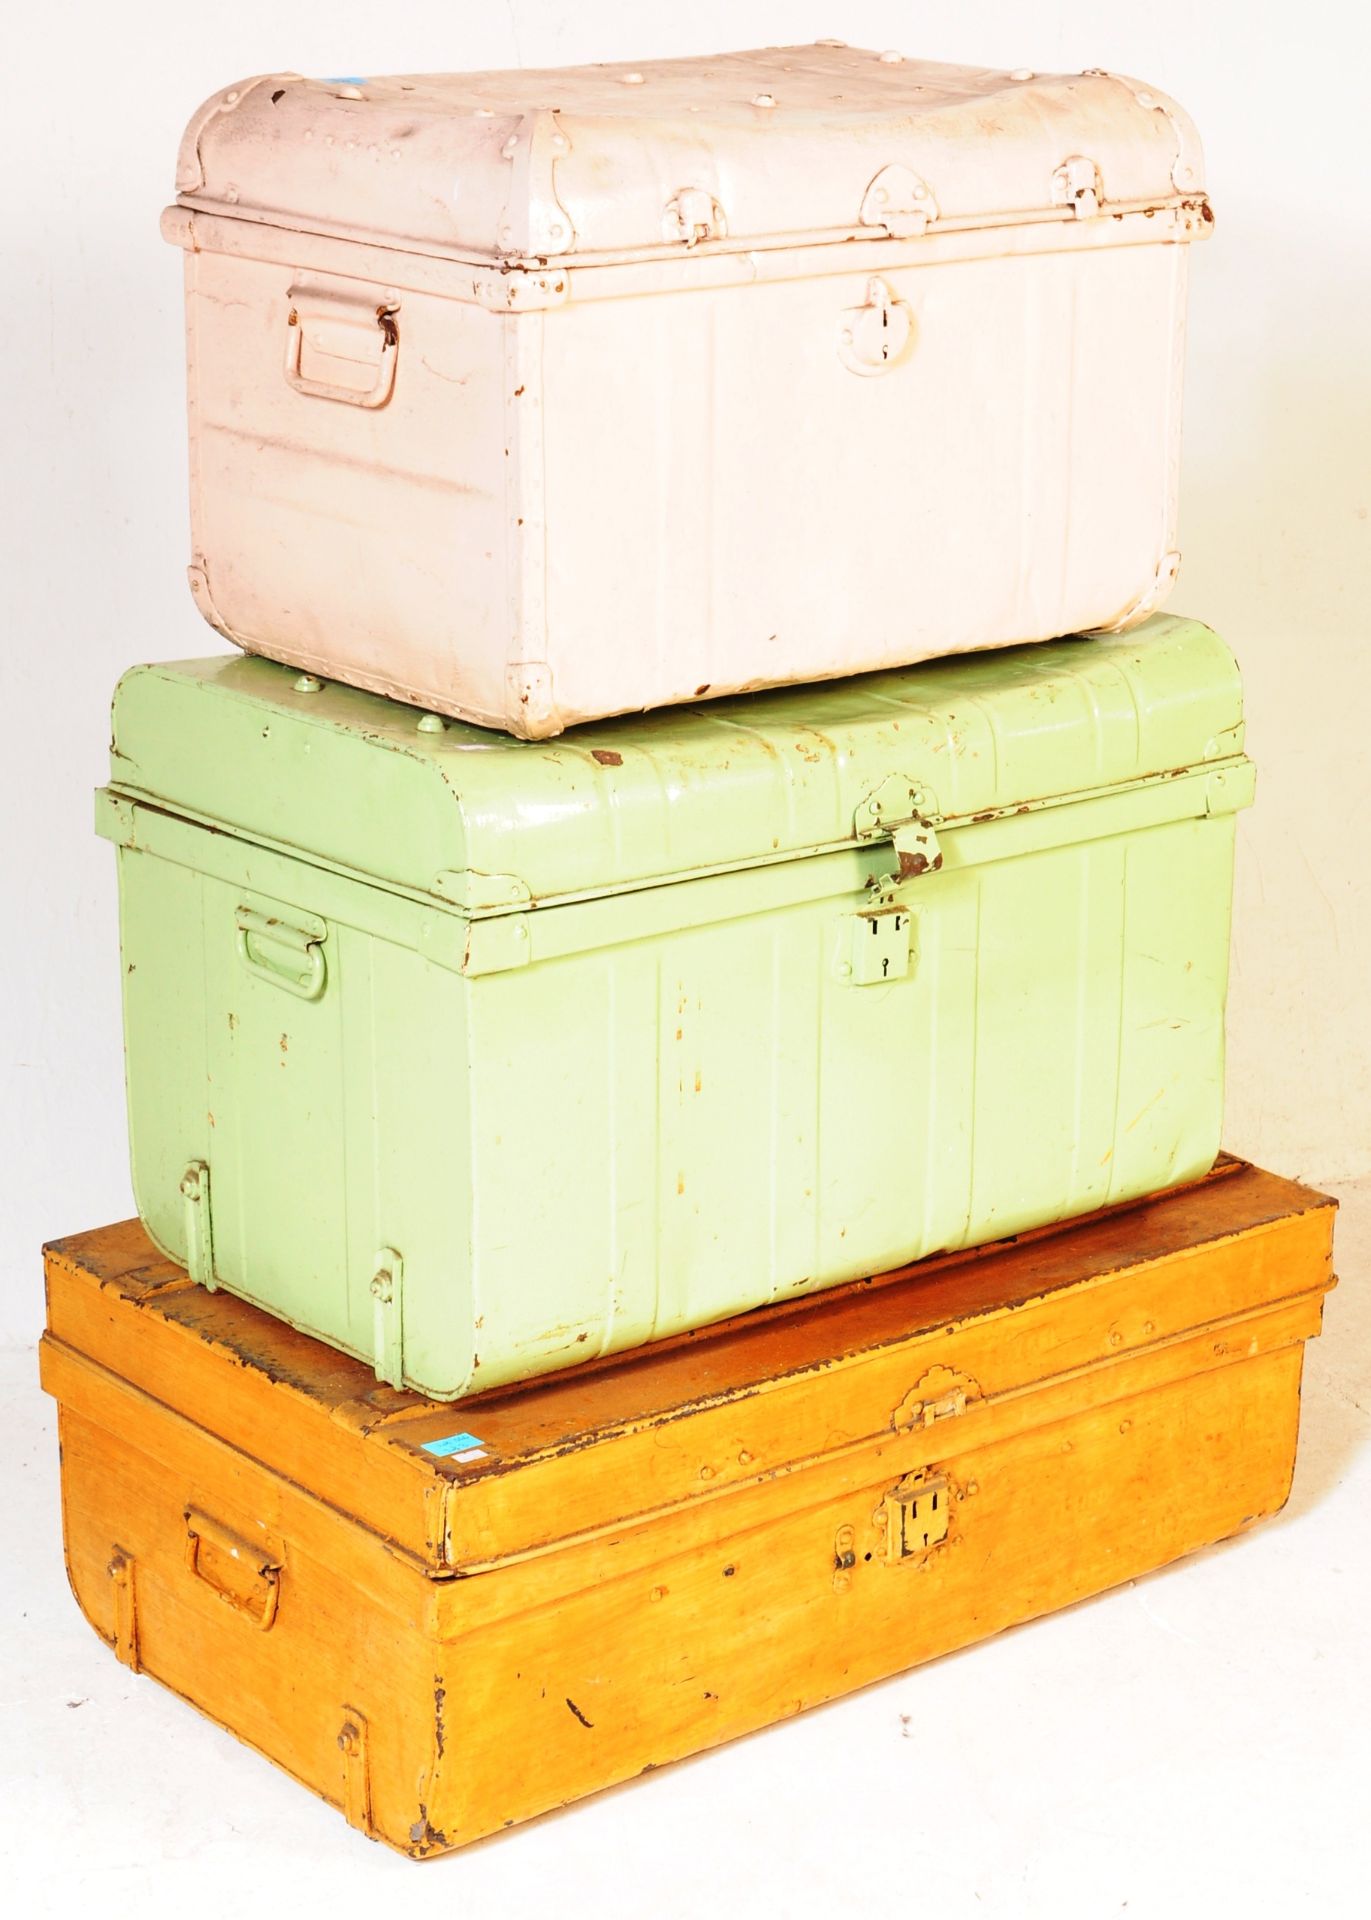 THREE METAL TRUNKS / CASES COMPLETE WITH HANDLES